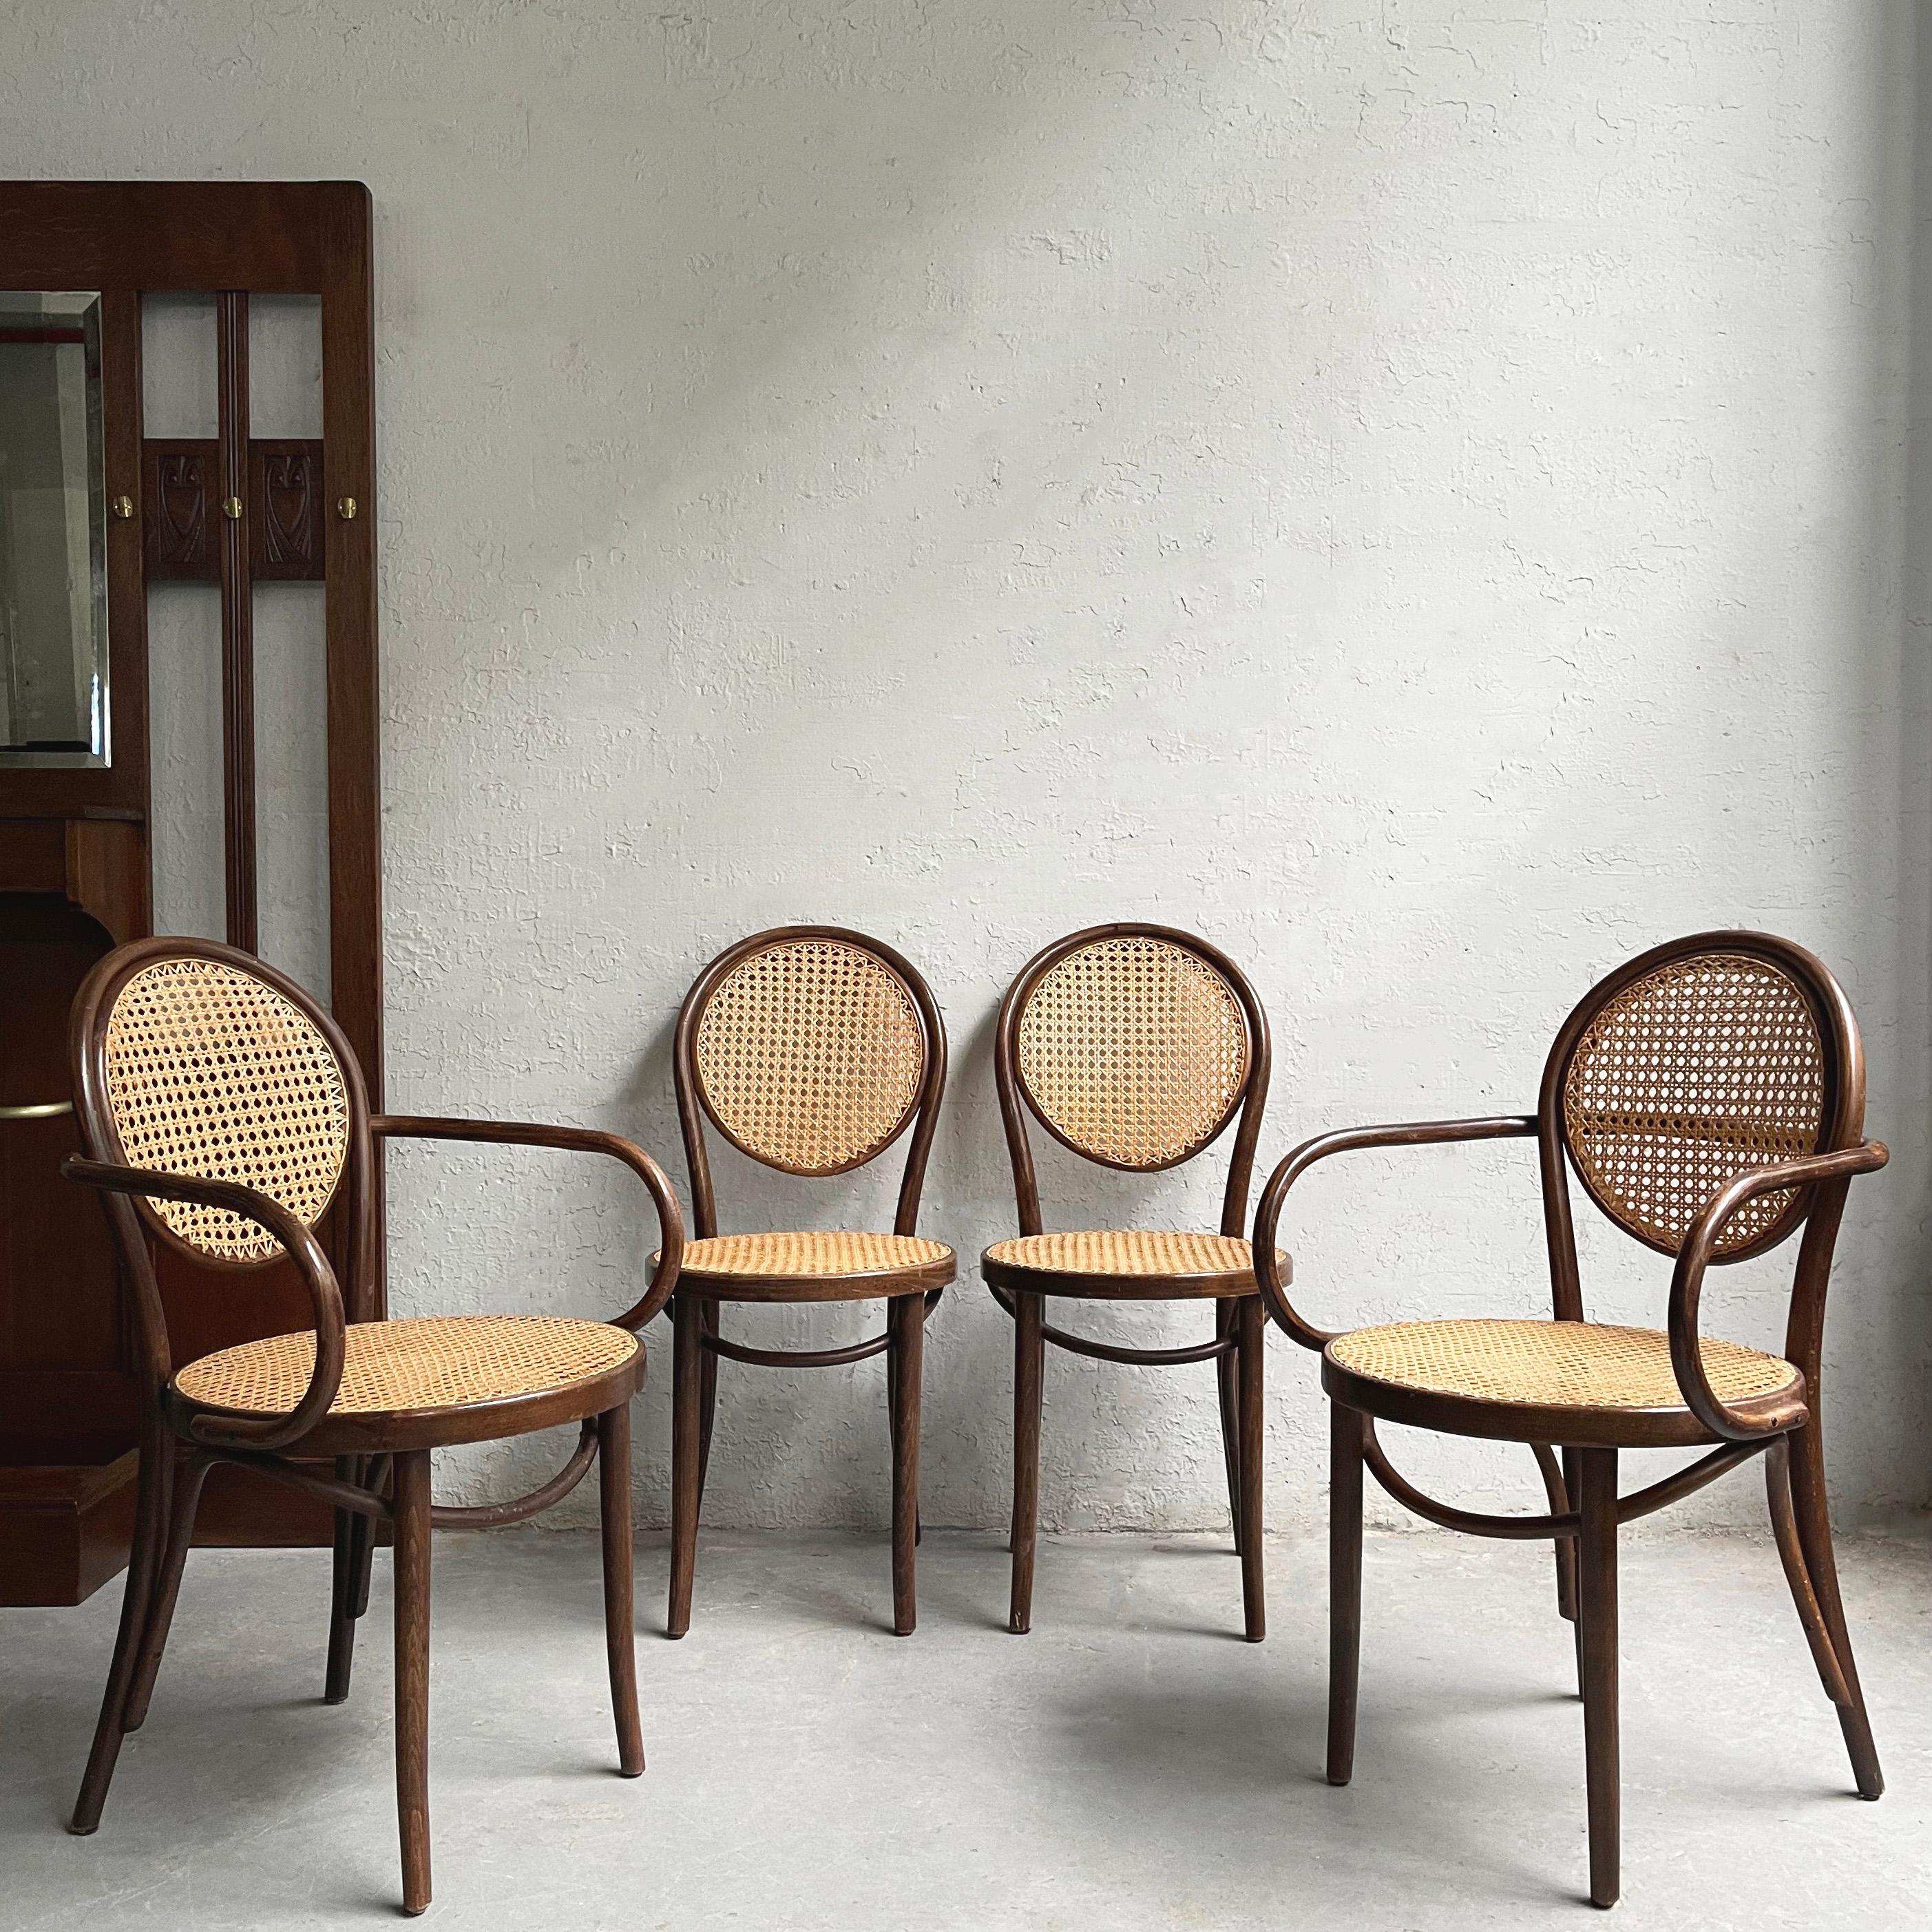 Set of four, bistro/café, dining chairs attributed to Thonet feature stained maple, bentwood frames with caned seats and backs. There are 2 armchairs and 2 side chairs. The side chairs measure 16 inches wide x 18 inches deep.